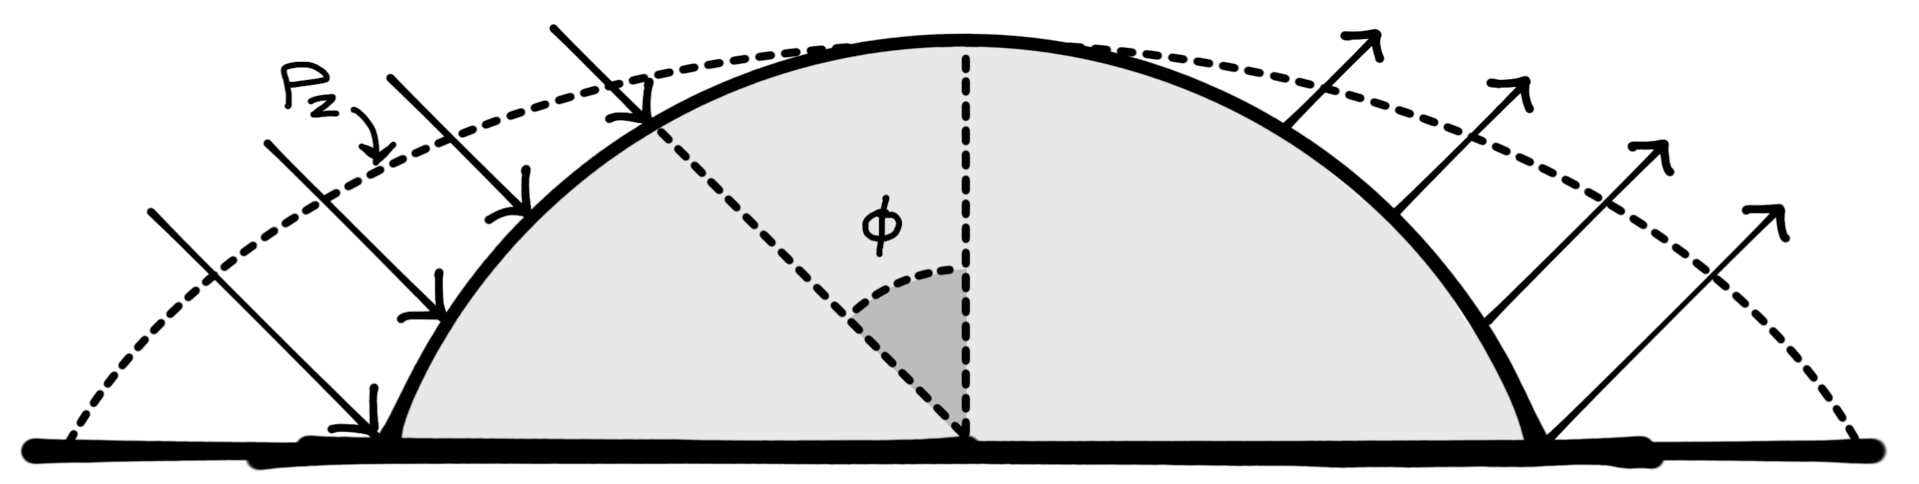 Figure 1. Elevation diagram of wind forces affecting a concrete dome.